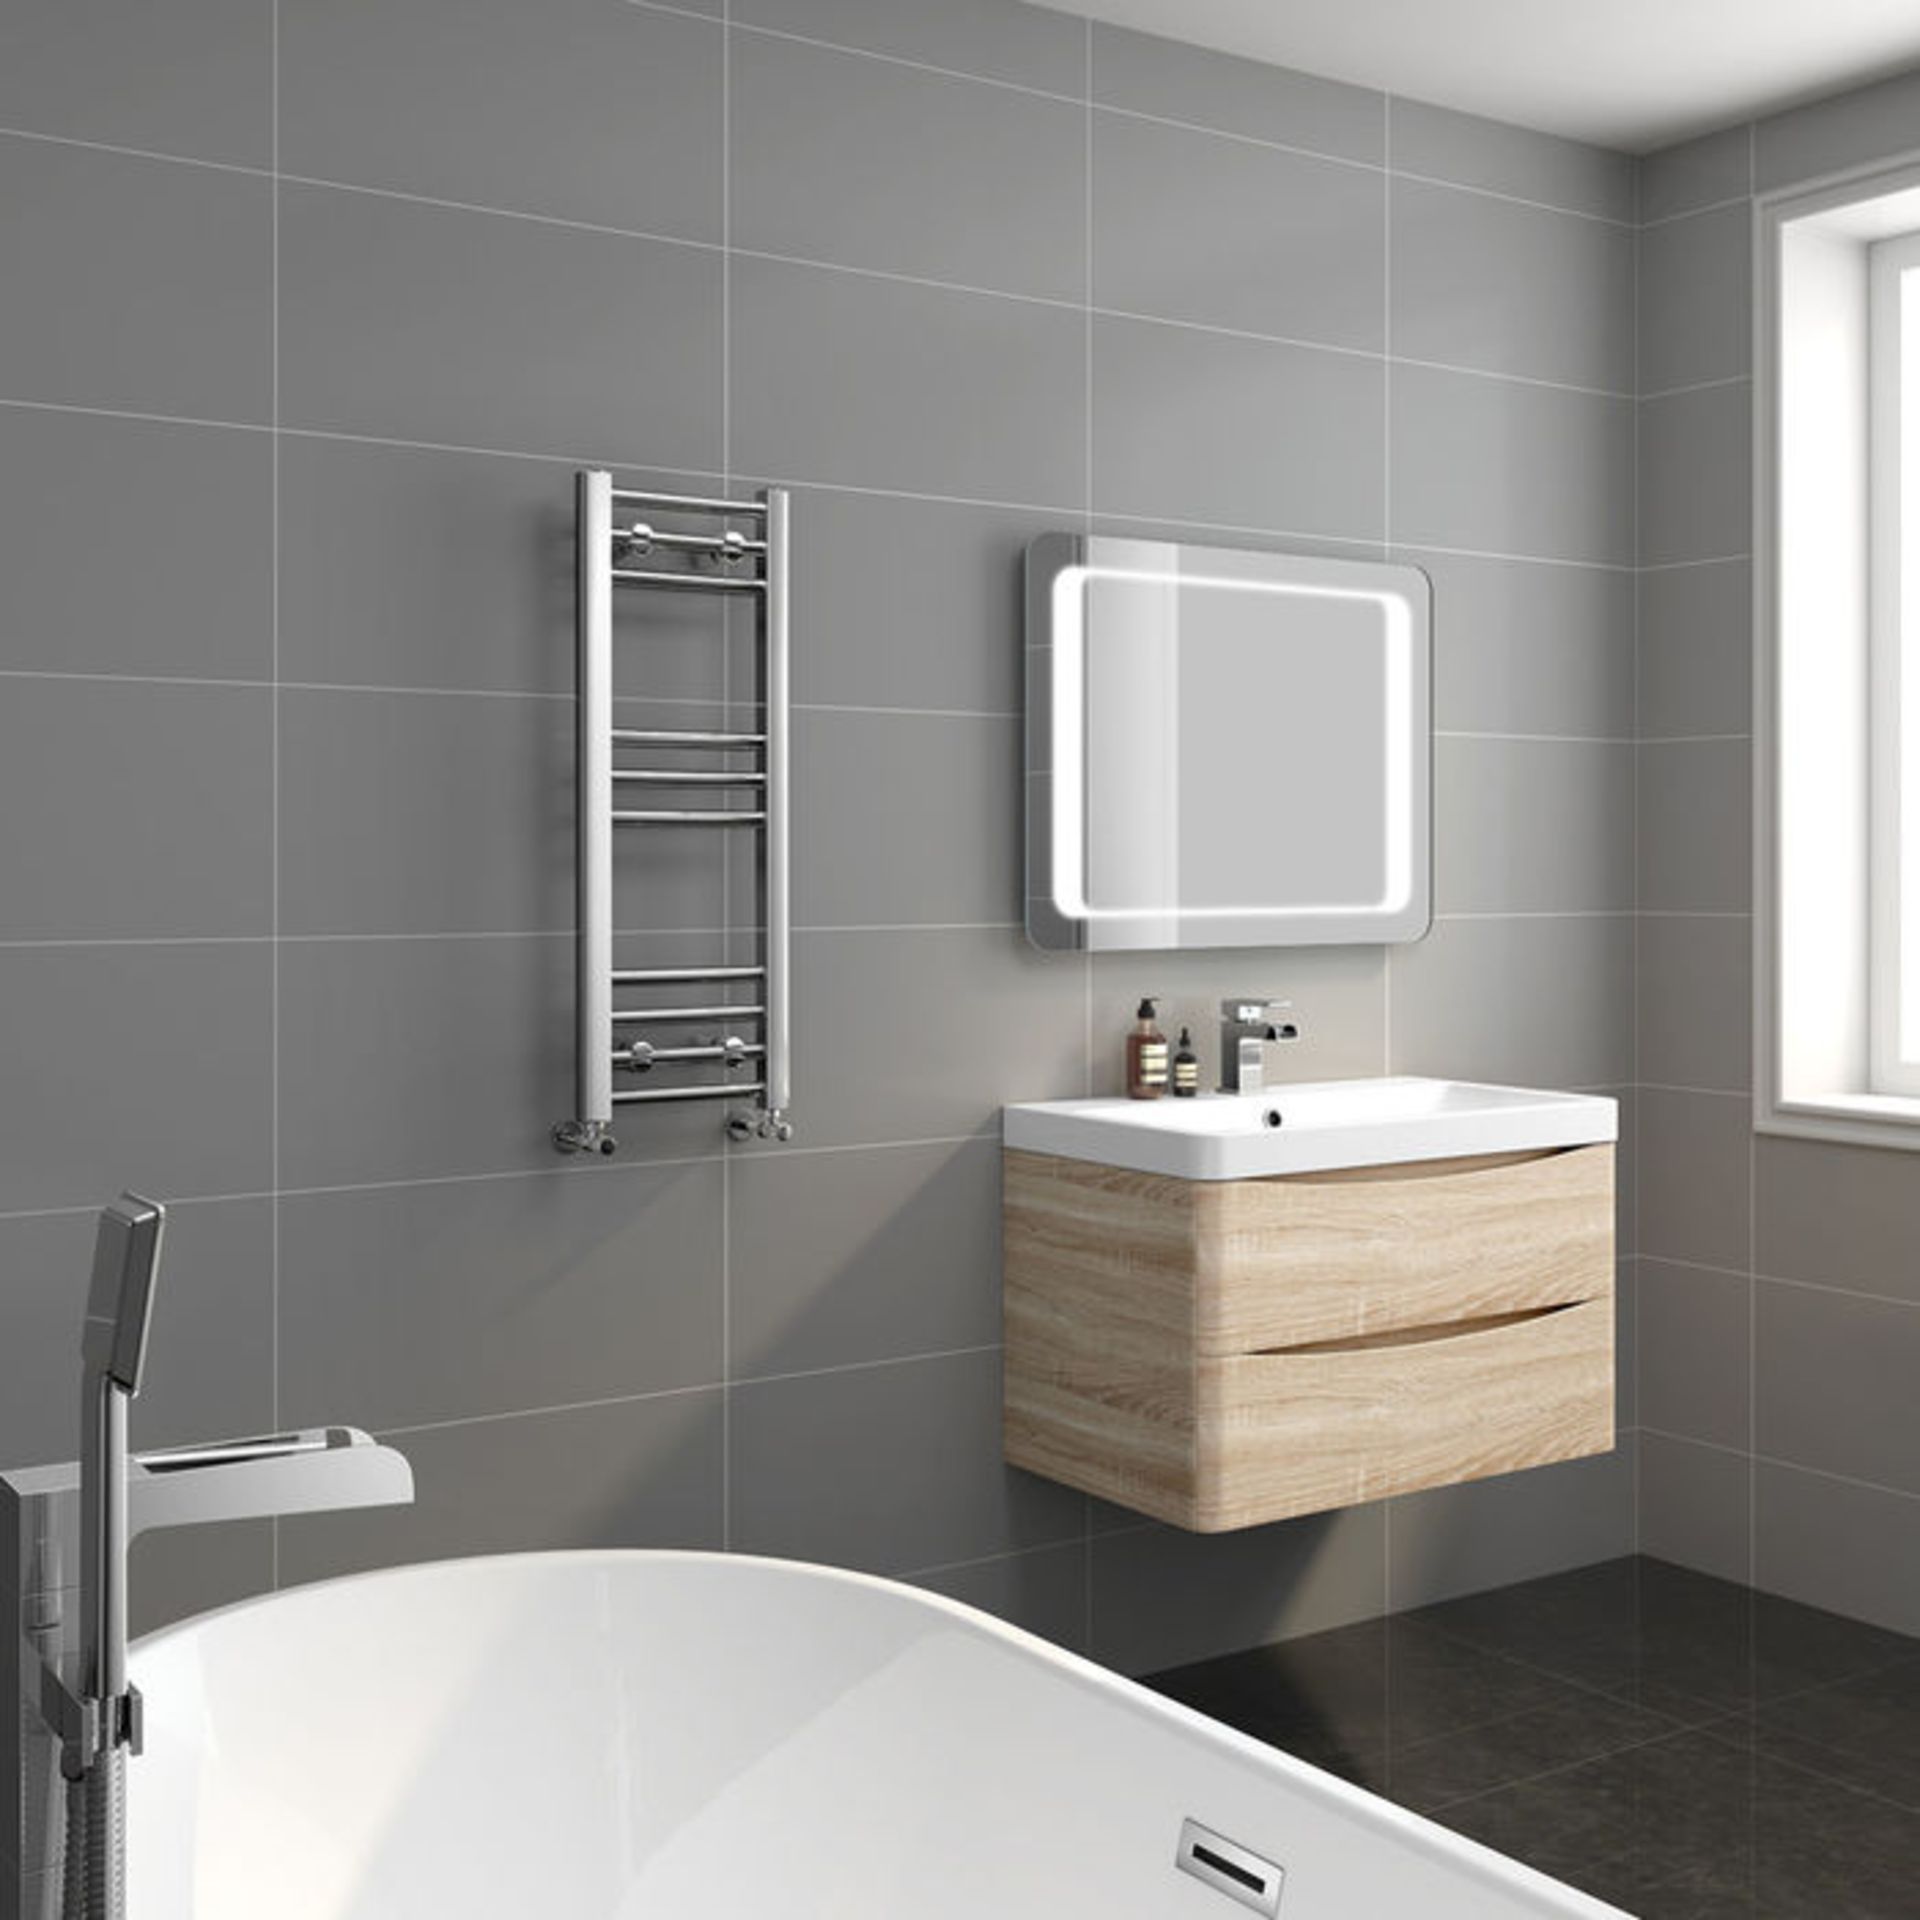 (G52) 800x300mm - 20mm Tubes - Chrome Heated Straight Rail Ladder Towel Rail Low carbon steel chrome - Image 2 of 4